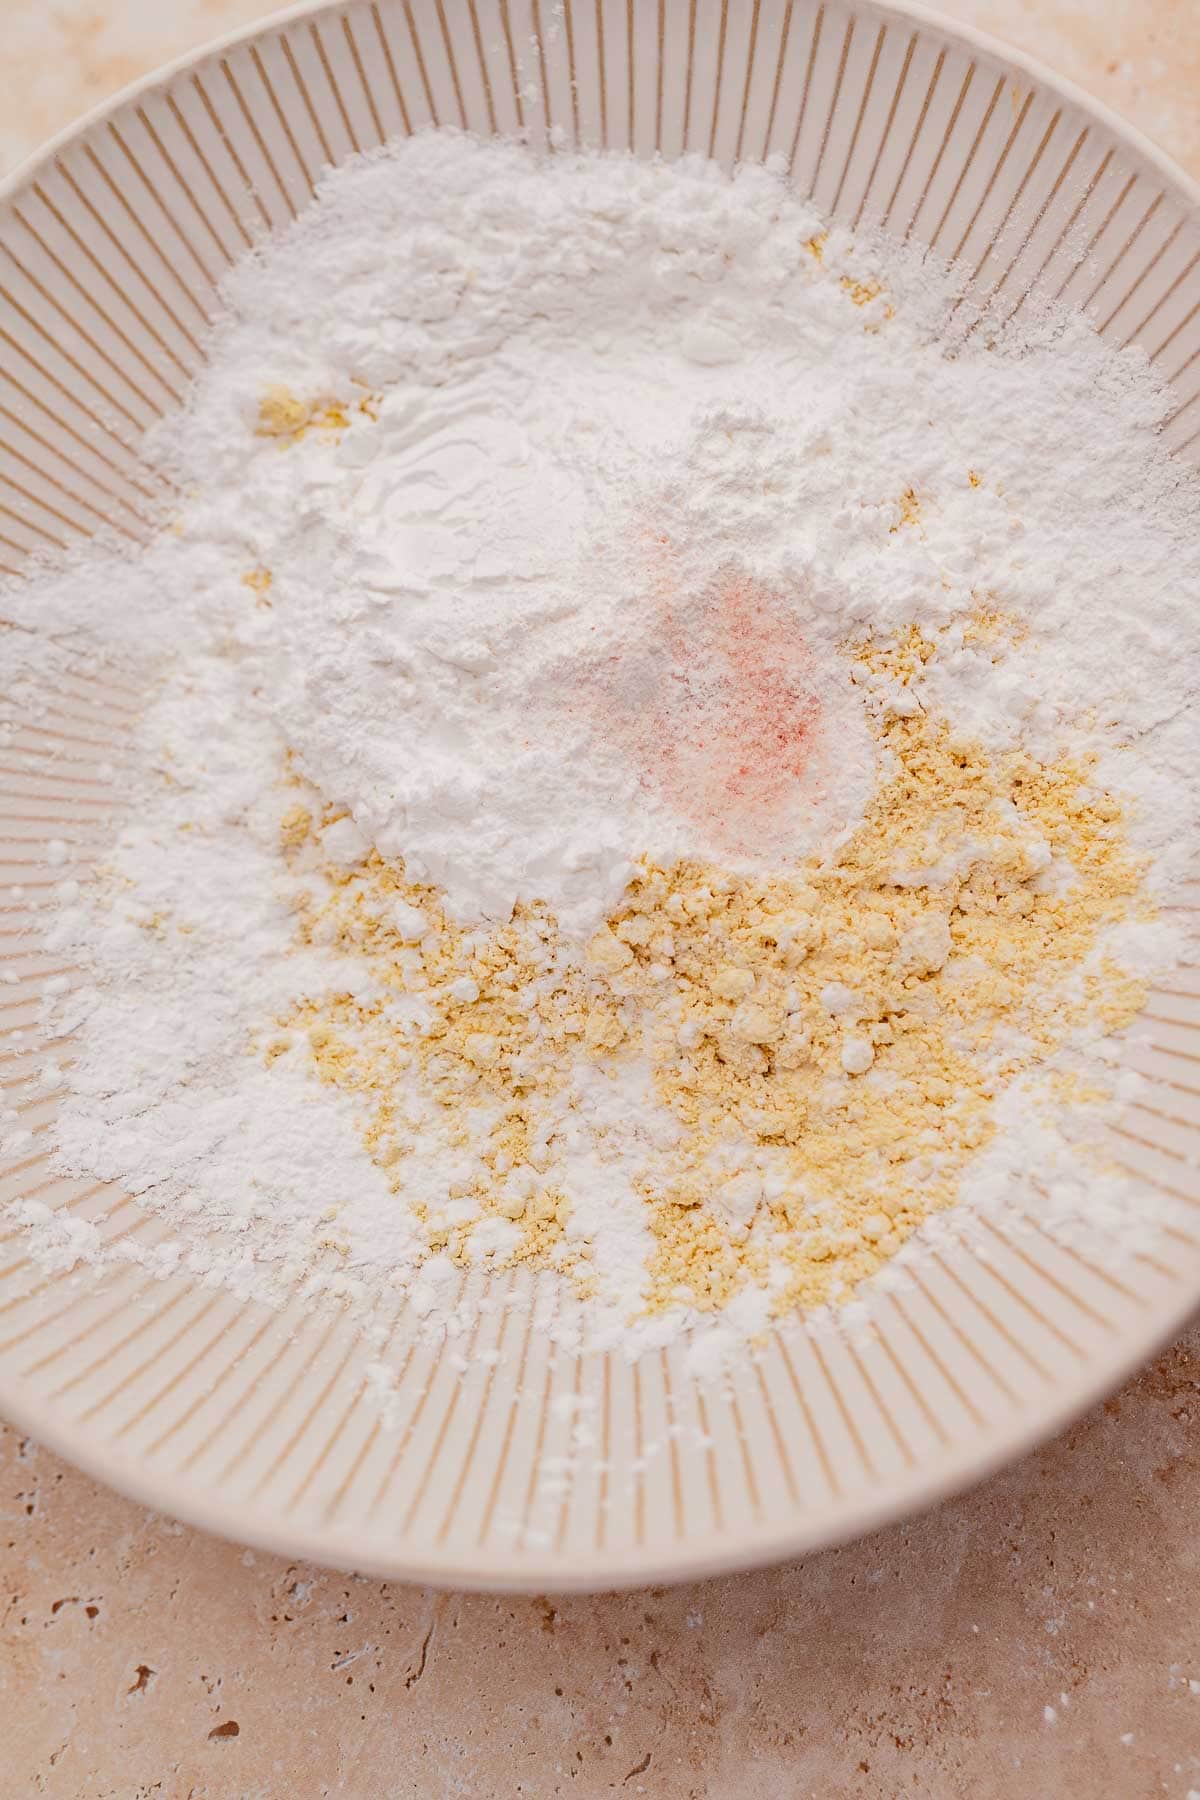 A bowl containing a mix of chickpea flour, baking powder, and a pinch of salt on a kitchen counter.